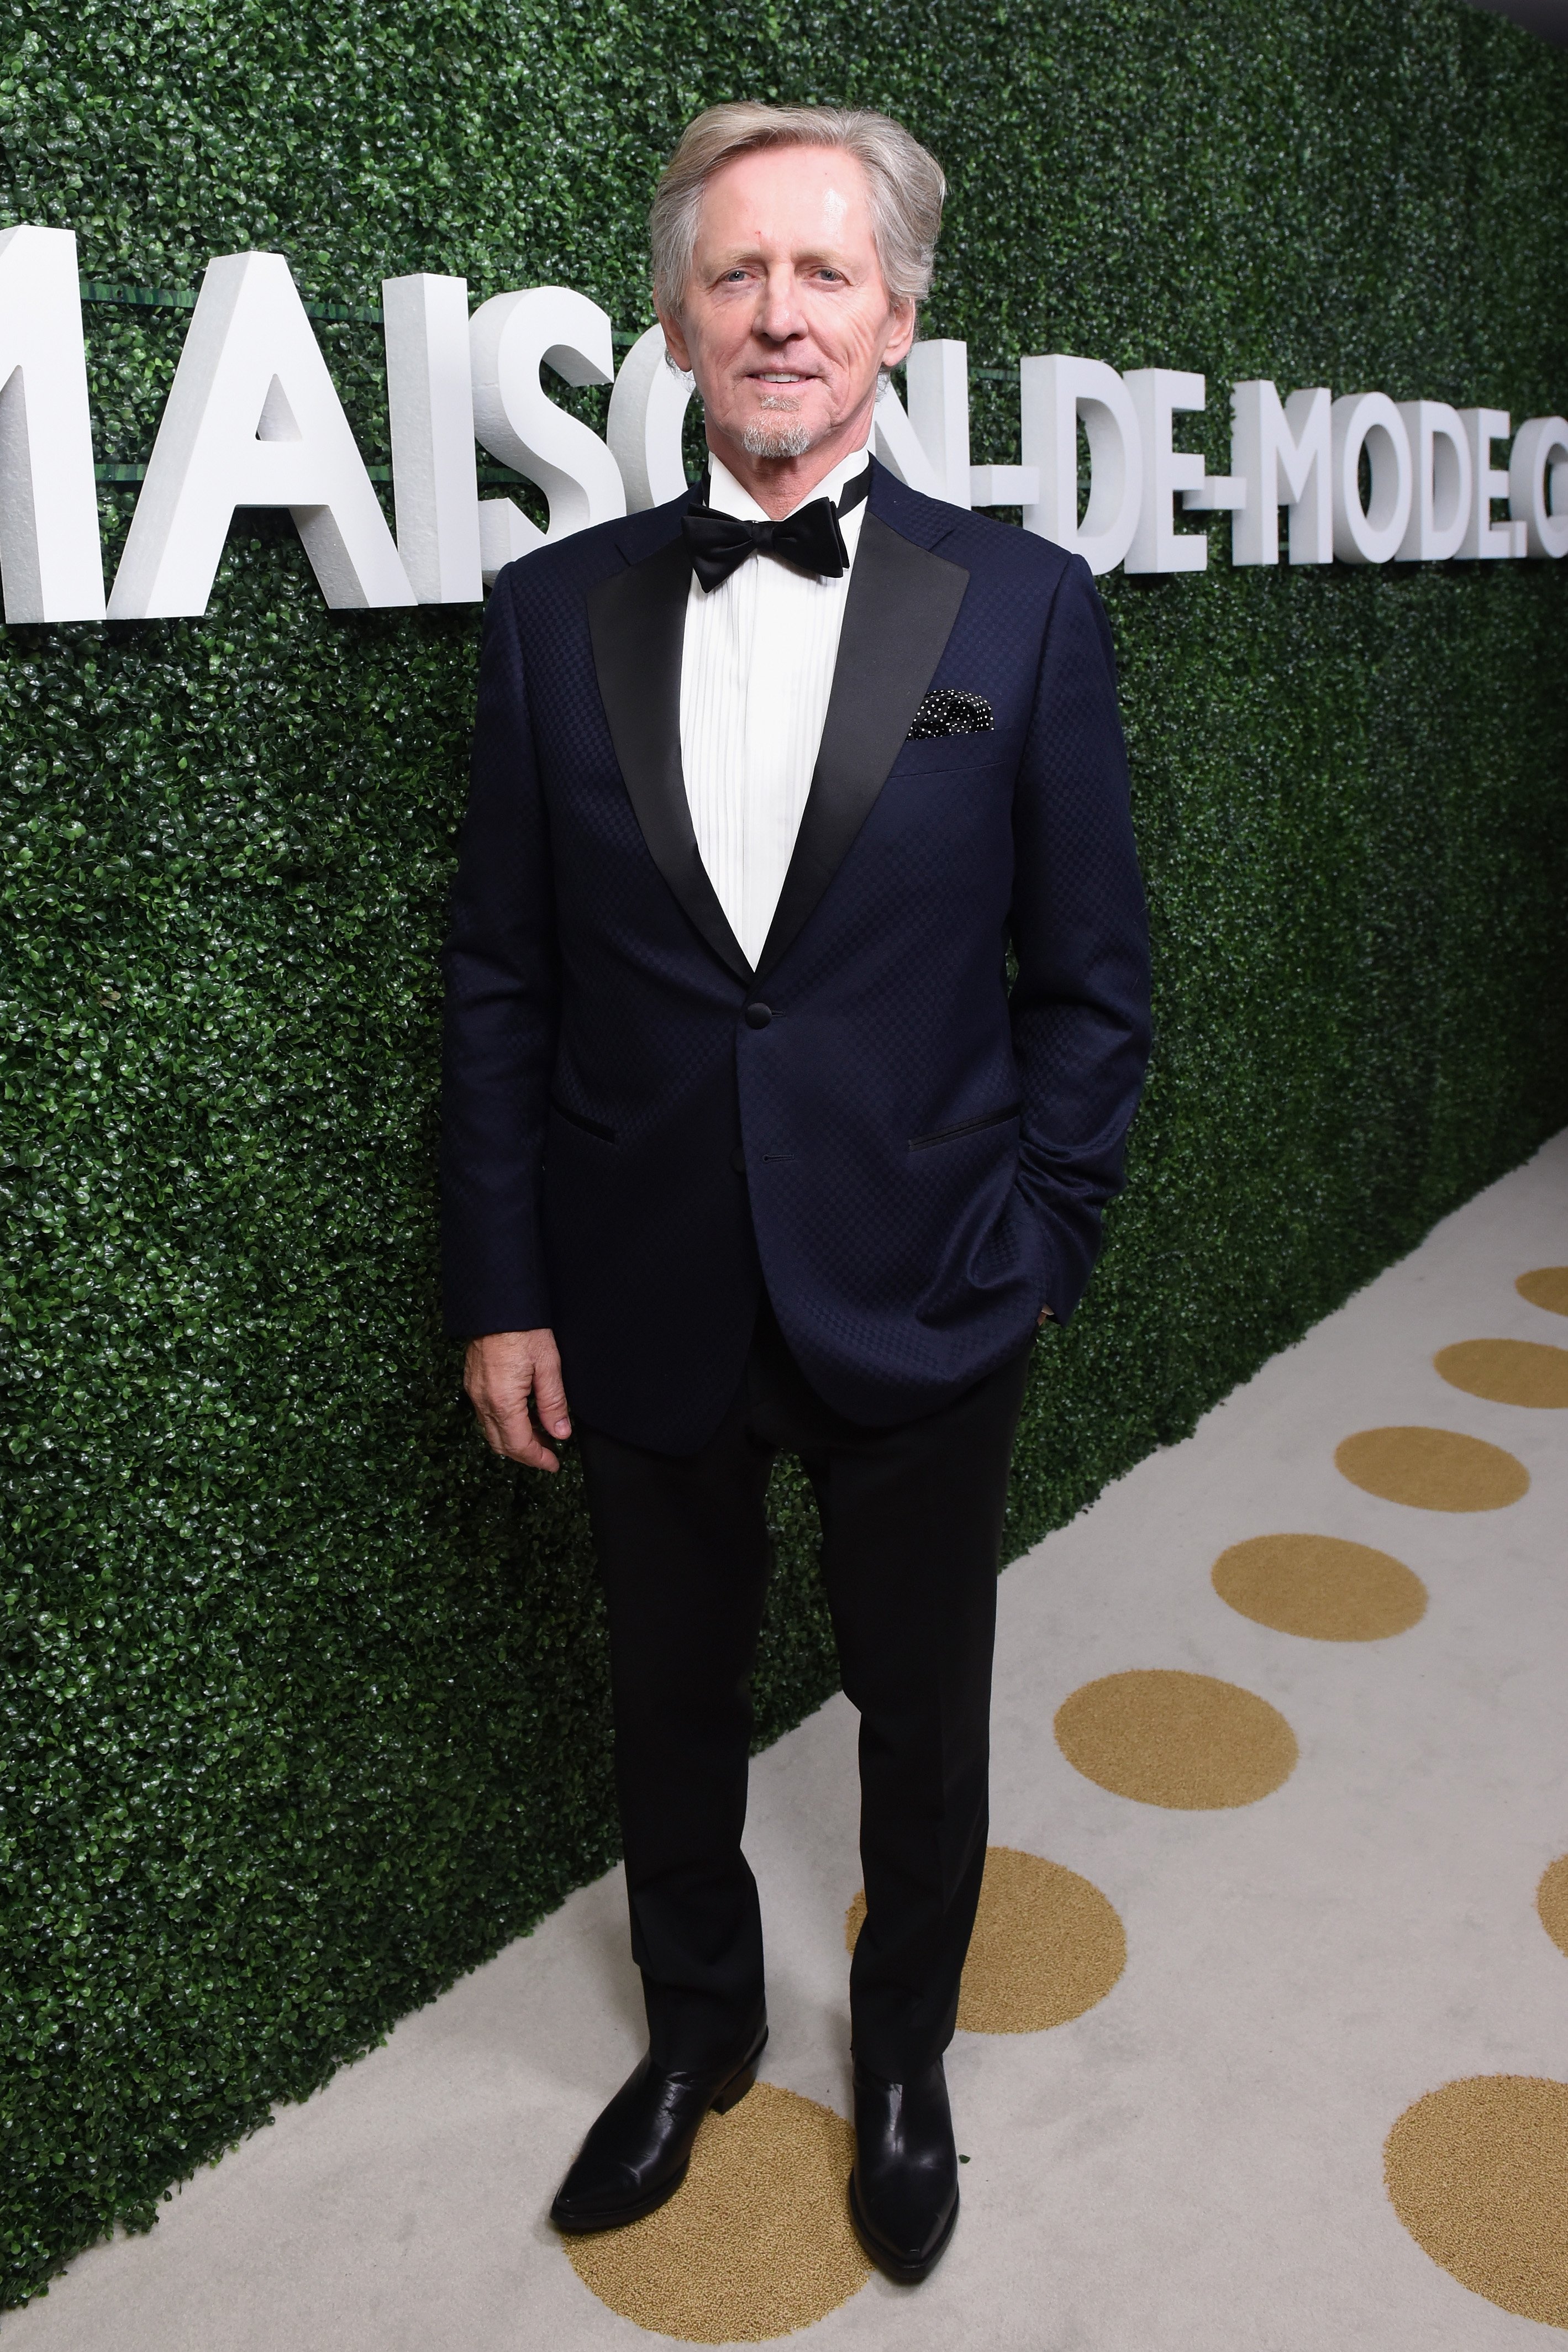 Bernt Bodal at the MAISON-DE-MODE.COM Sustainable Style Gala in Los Angeles on February 23, 2019 | Source: Getty Images